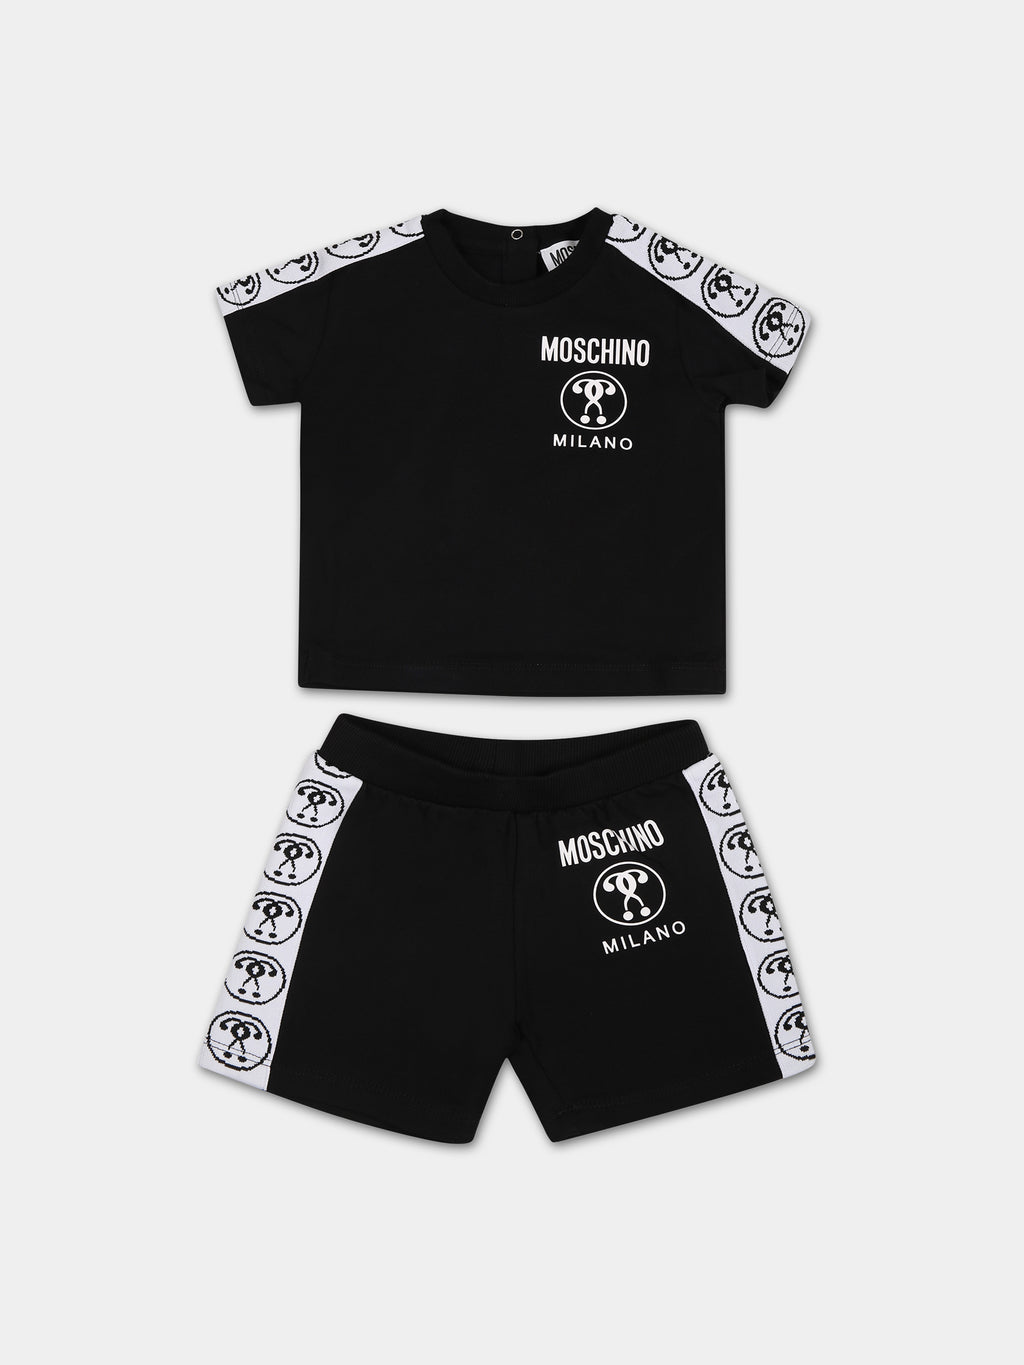 Black suit for baby boy with logo